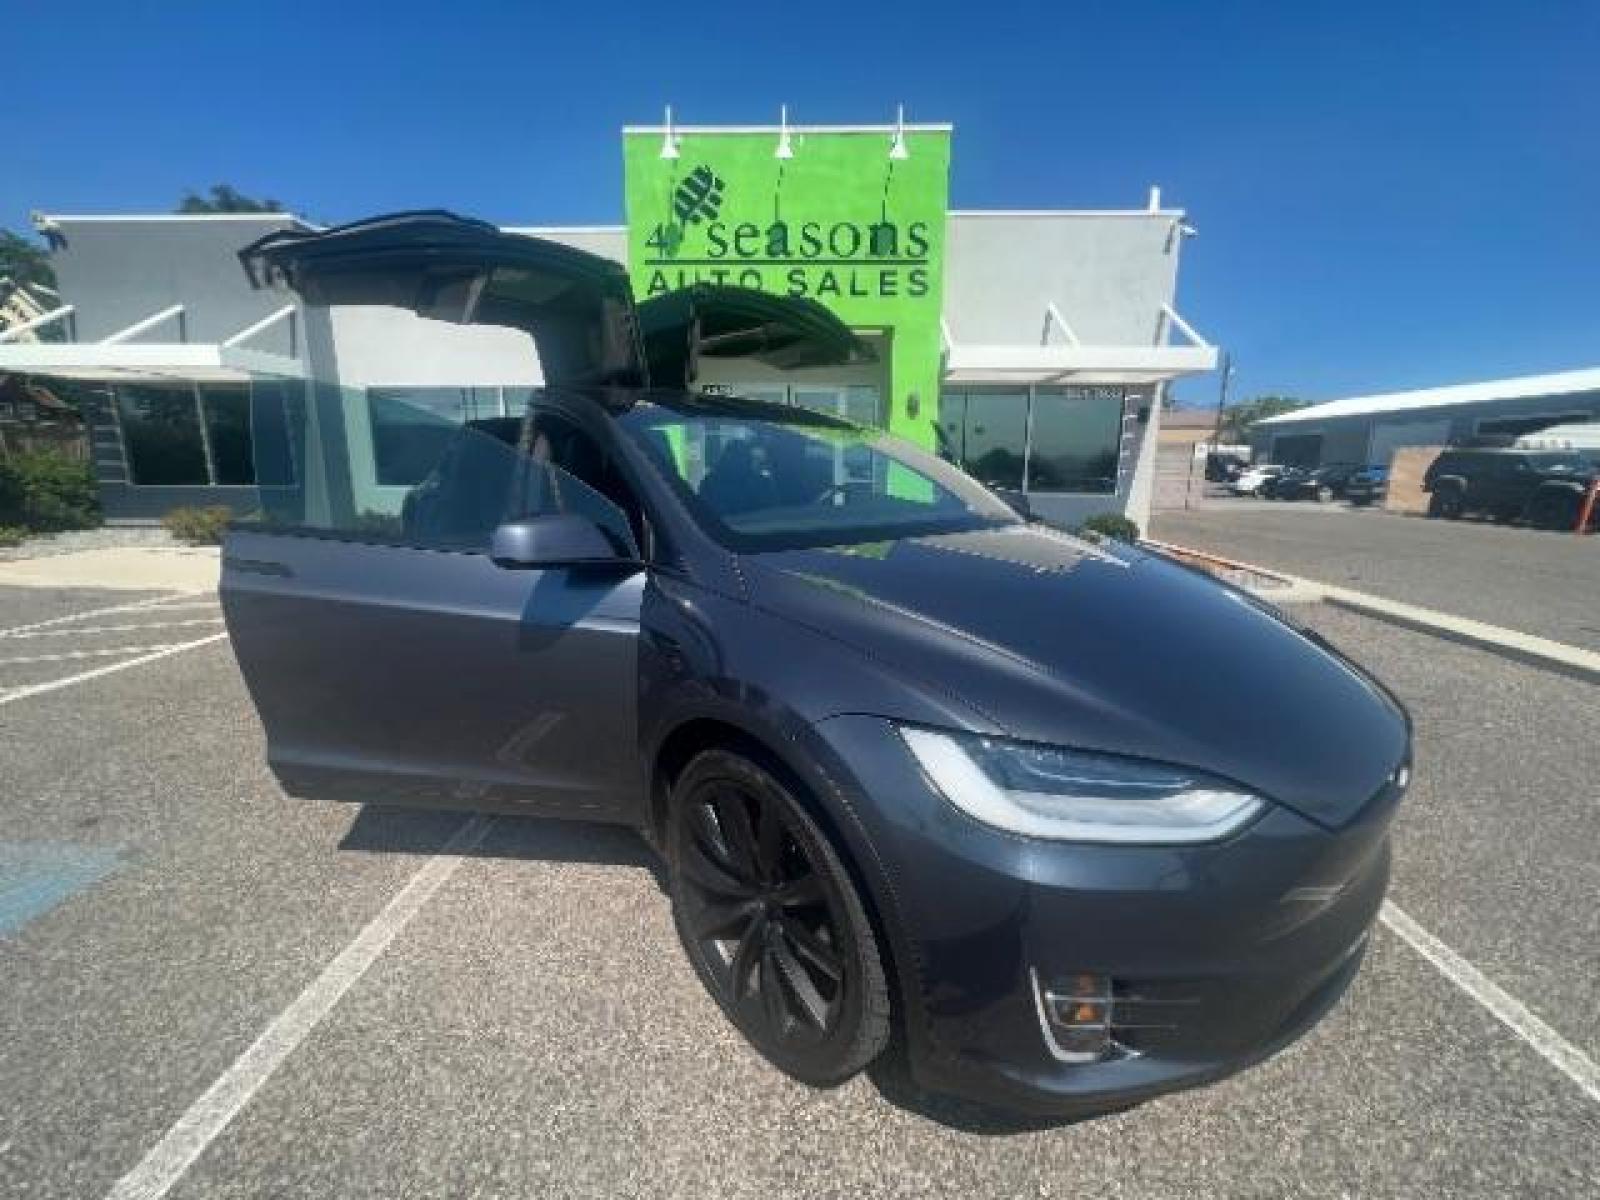 2020 Midnight Silver Metallic /All Black, leatherette Tesla Model X Performance (5YJXCBE45LF) with an ELECTRIC engine, 1-Speed Automatic transmission, located at 1865 East Red Hills Pkwy, St. George, 84770, (435) 628-0023, 37.120850, -113.543640 - 6 Seats, Ludicrous mode, 0-60mph in under 3 seconds, CLEAN TITLE, 1 Owner, Tow hitch, CCS adapter installed, Homelink, Low Miles, Great condition, New tires, Full self driving capable computer. Bumper 2 bumper warranty until Feb-2024, Motor and Battery warranty until Feb-2028. Call or text for m - Photo #1